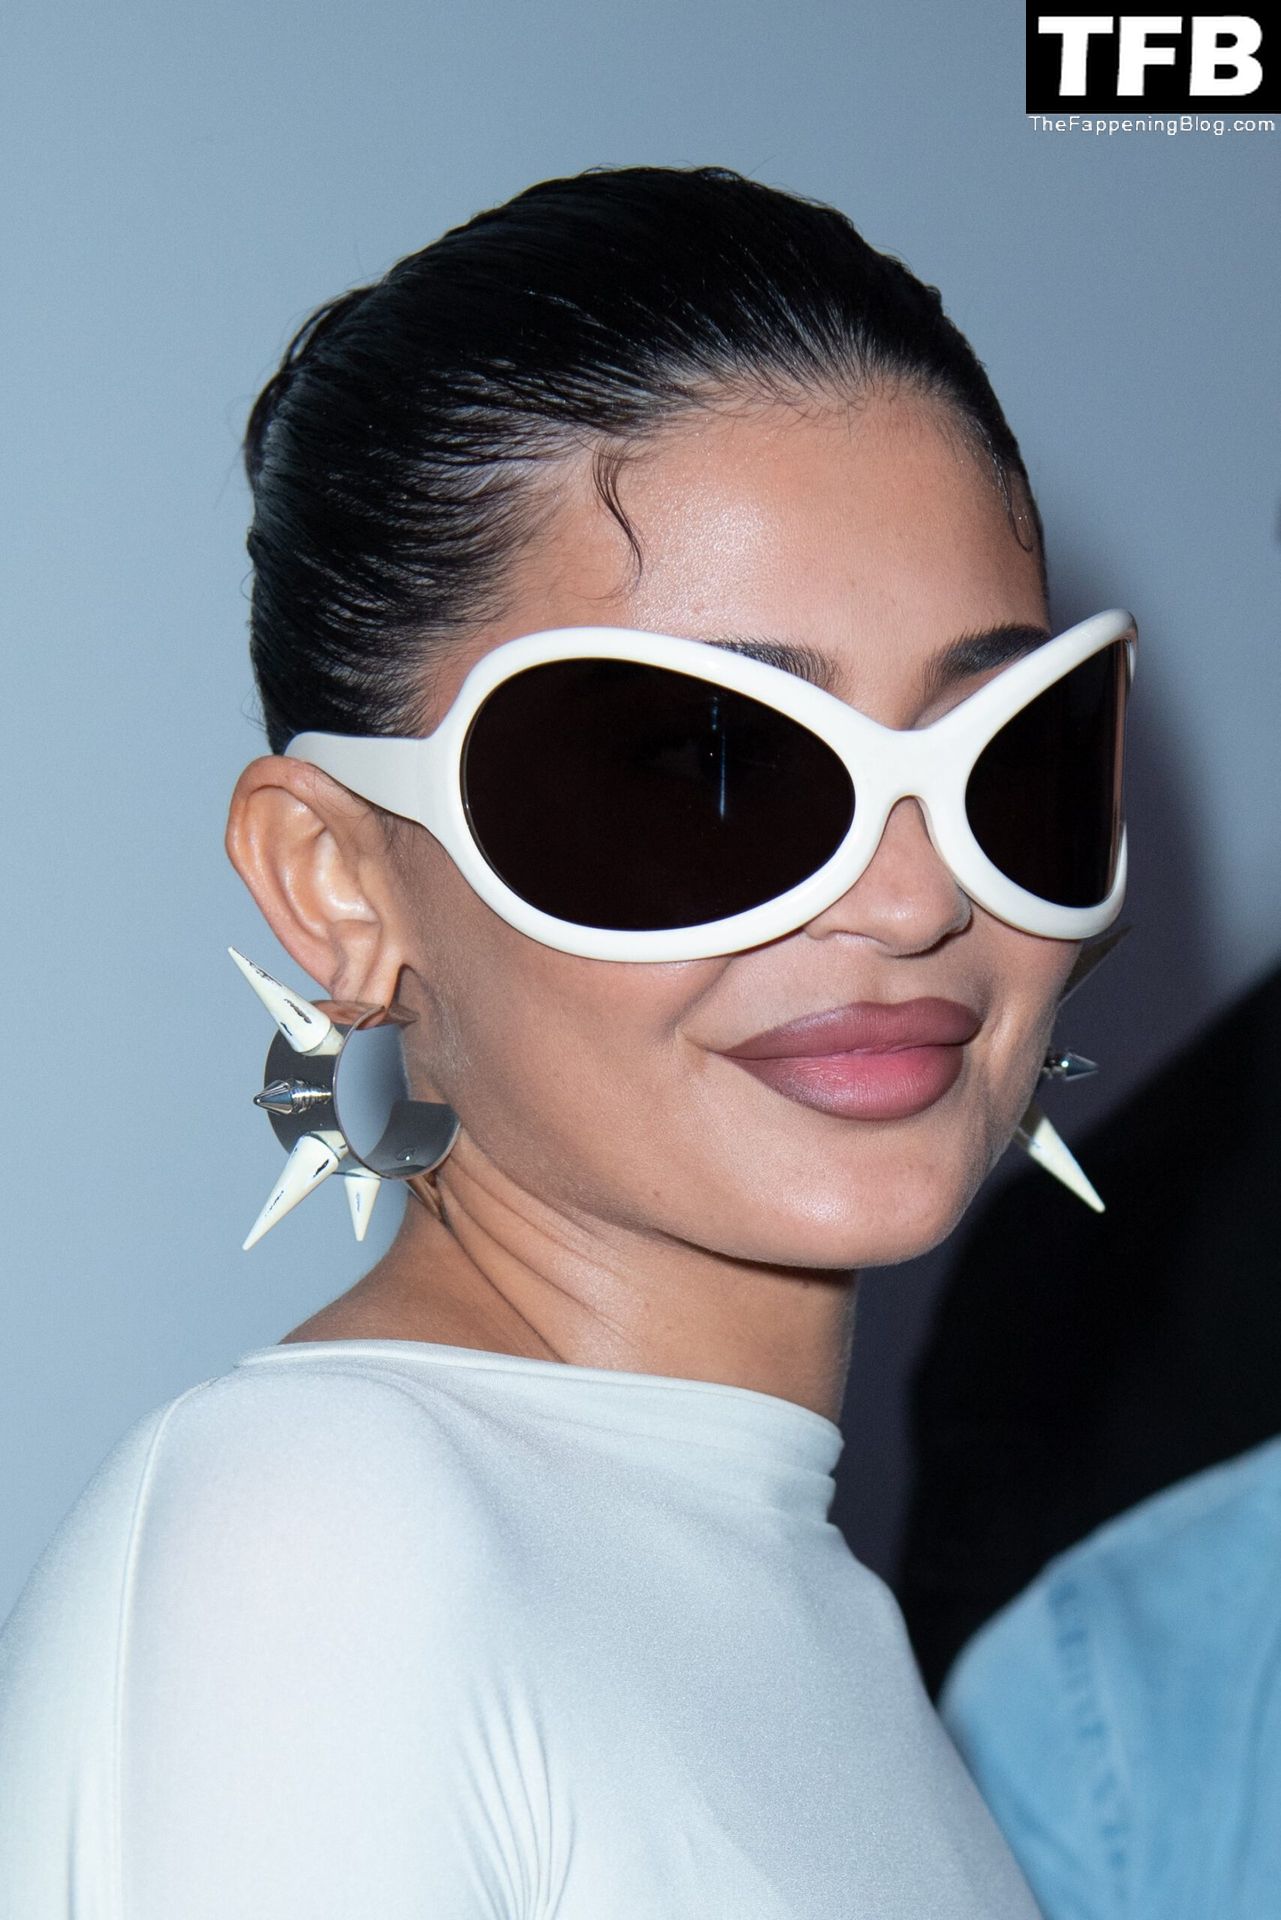 Kylie Jenner Flaunts Her Curves in a White Dress During Paris Fashion Week (150 Photos)